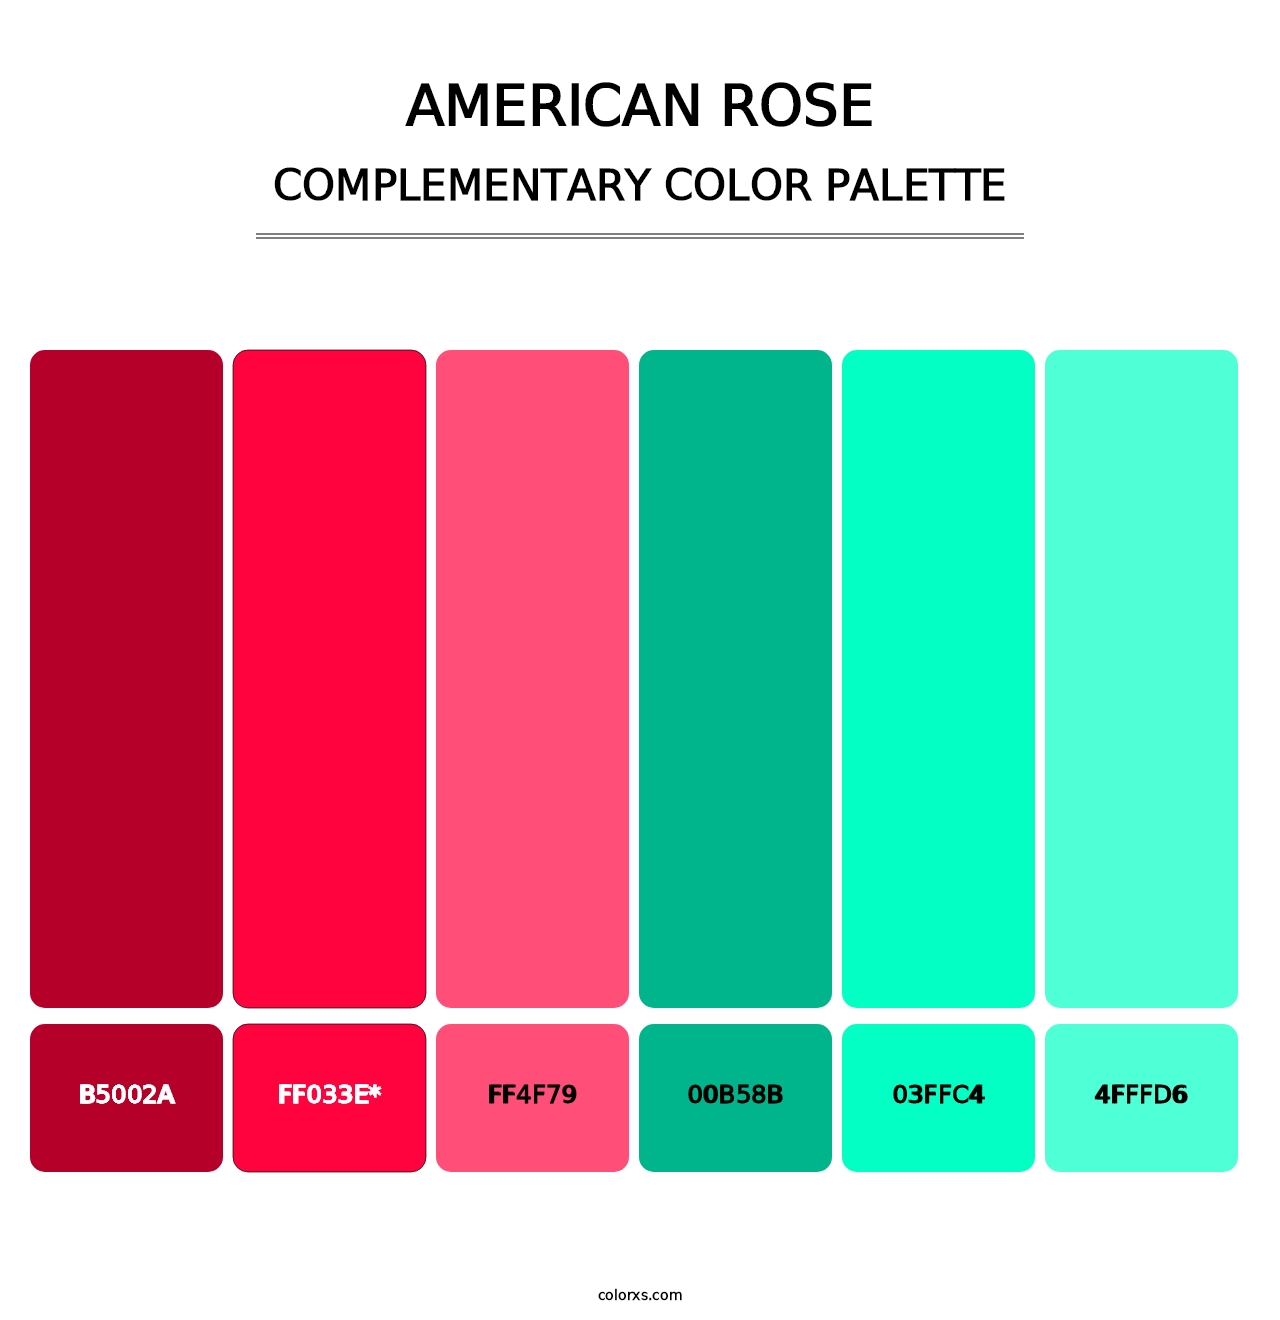 American Rose - Complementary Color Palette